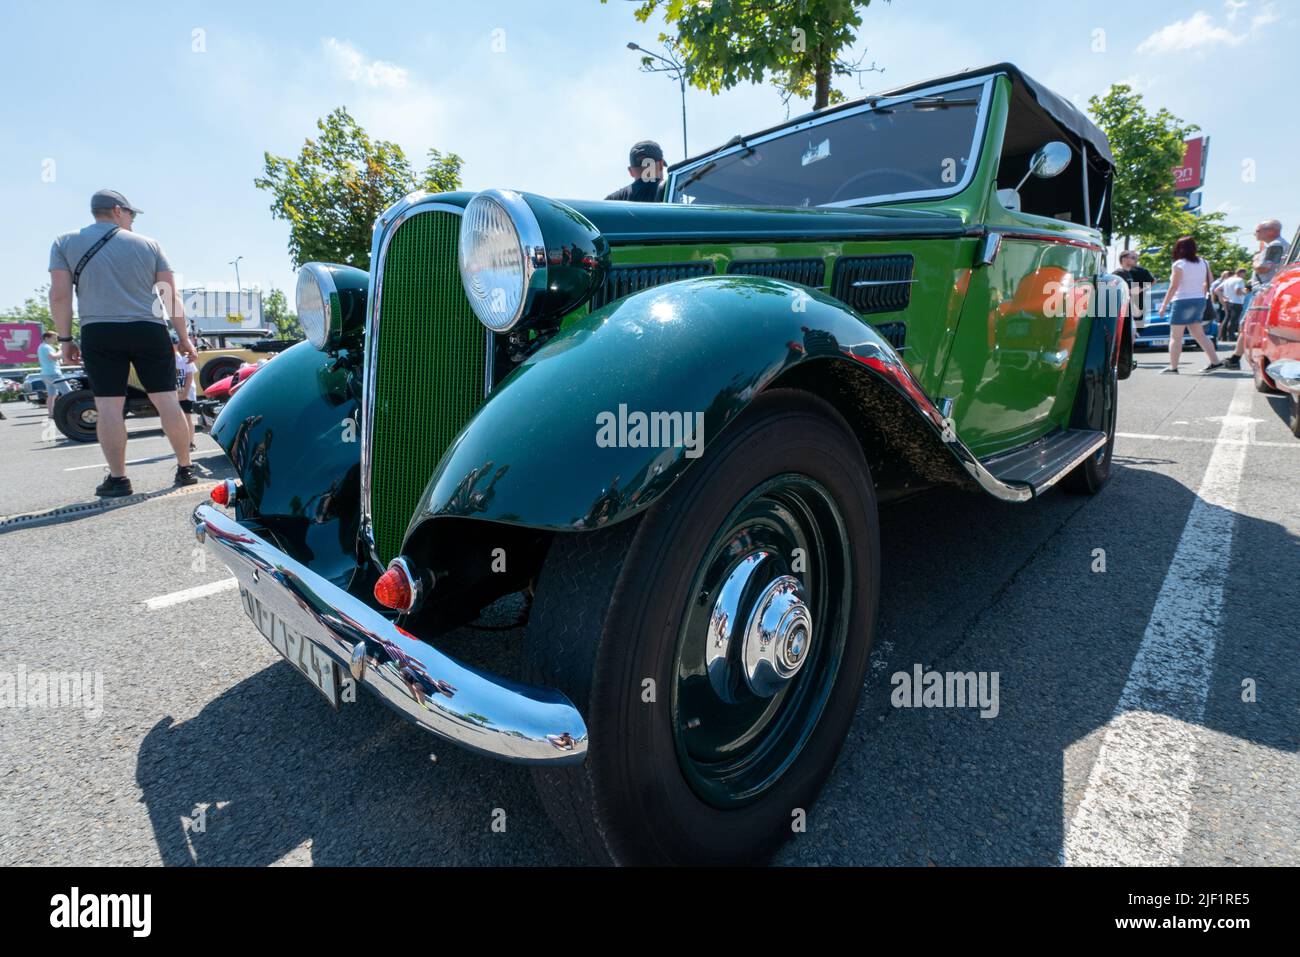 Ostrava, Czechia - 06.05.2022: Low angle frontal wide shot of very old green BMW veteran car. People admiring retro cars during veteran rallye event Stock Photo